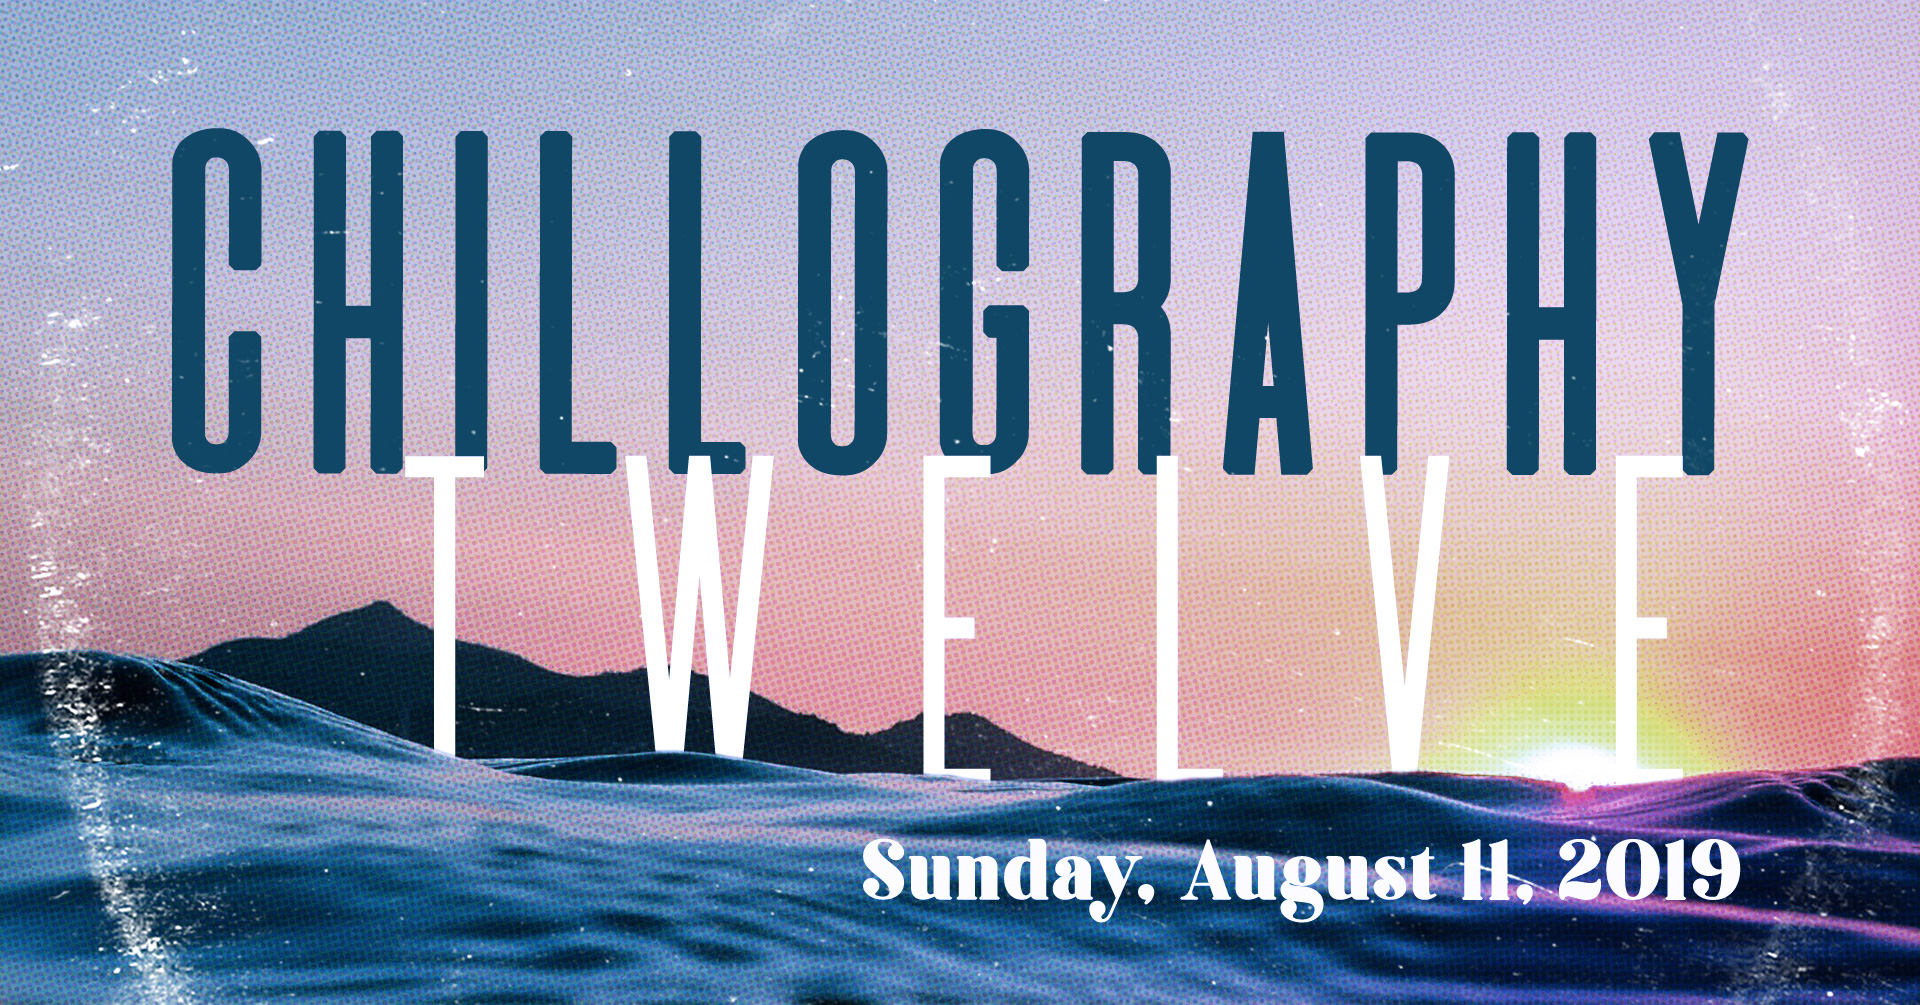 Chillography 12 banner